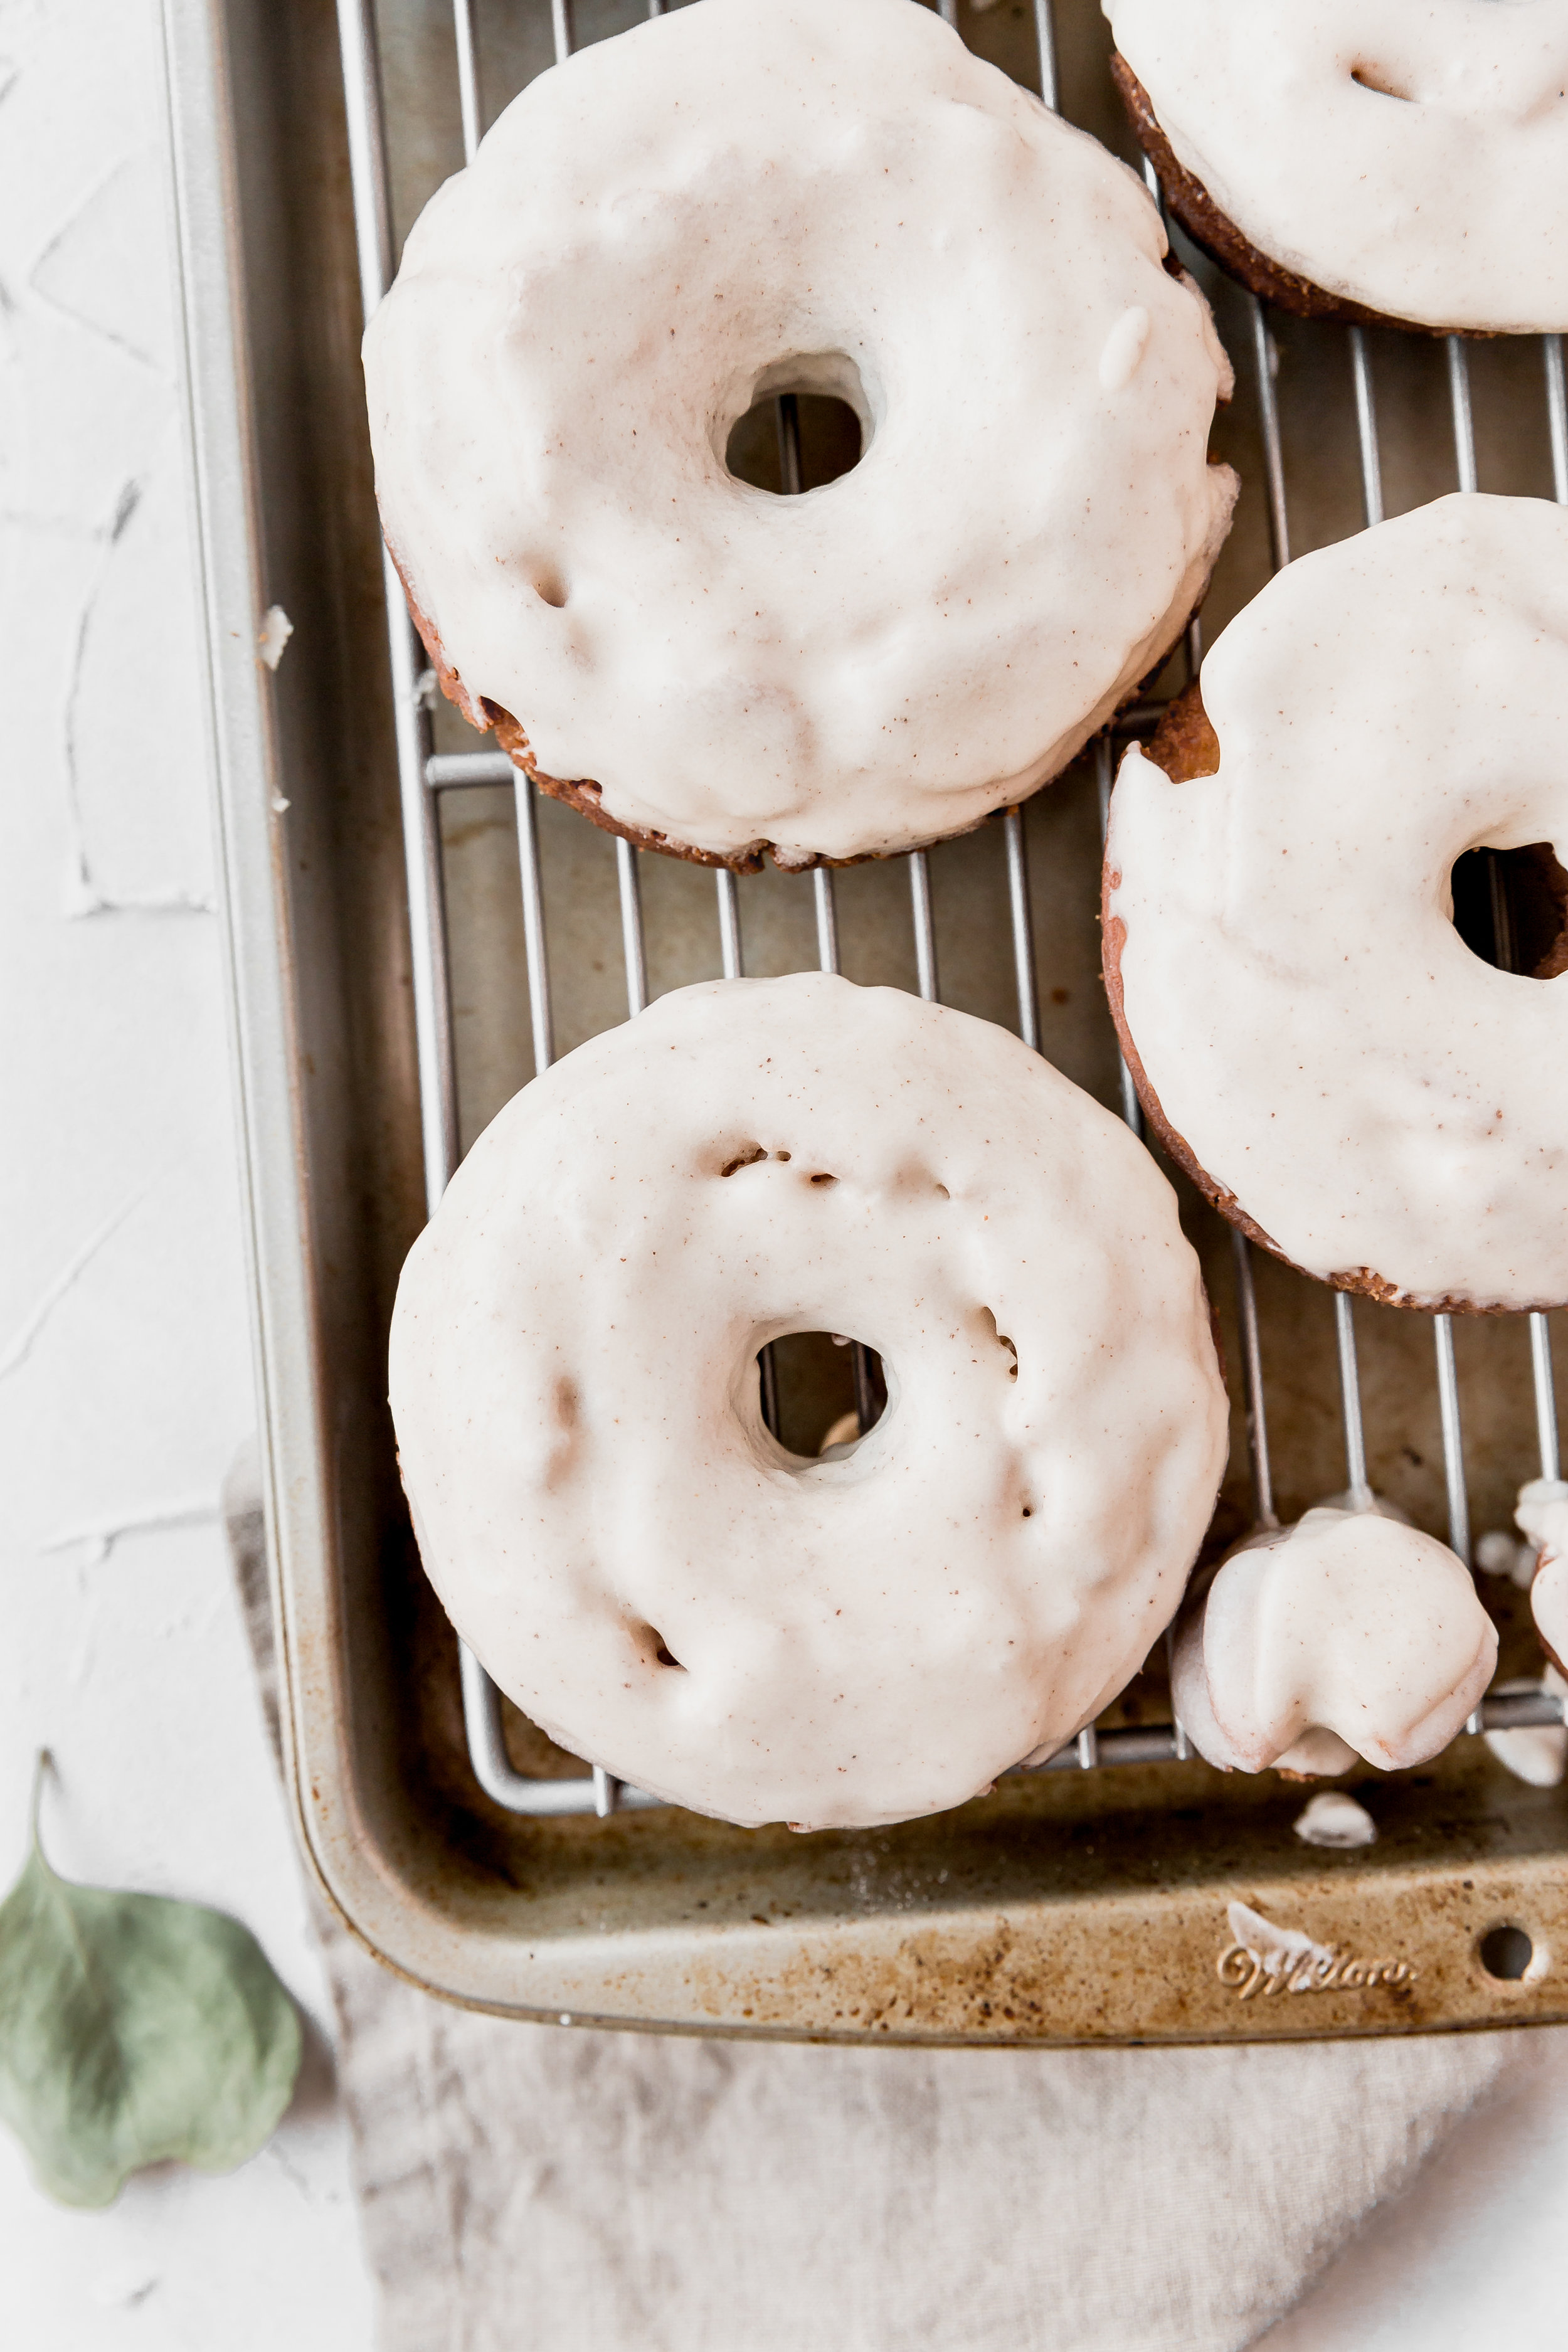 Brown Butter Old Fashioned Sour Cream Donuts || To Salt & See-1.jpg